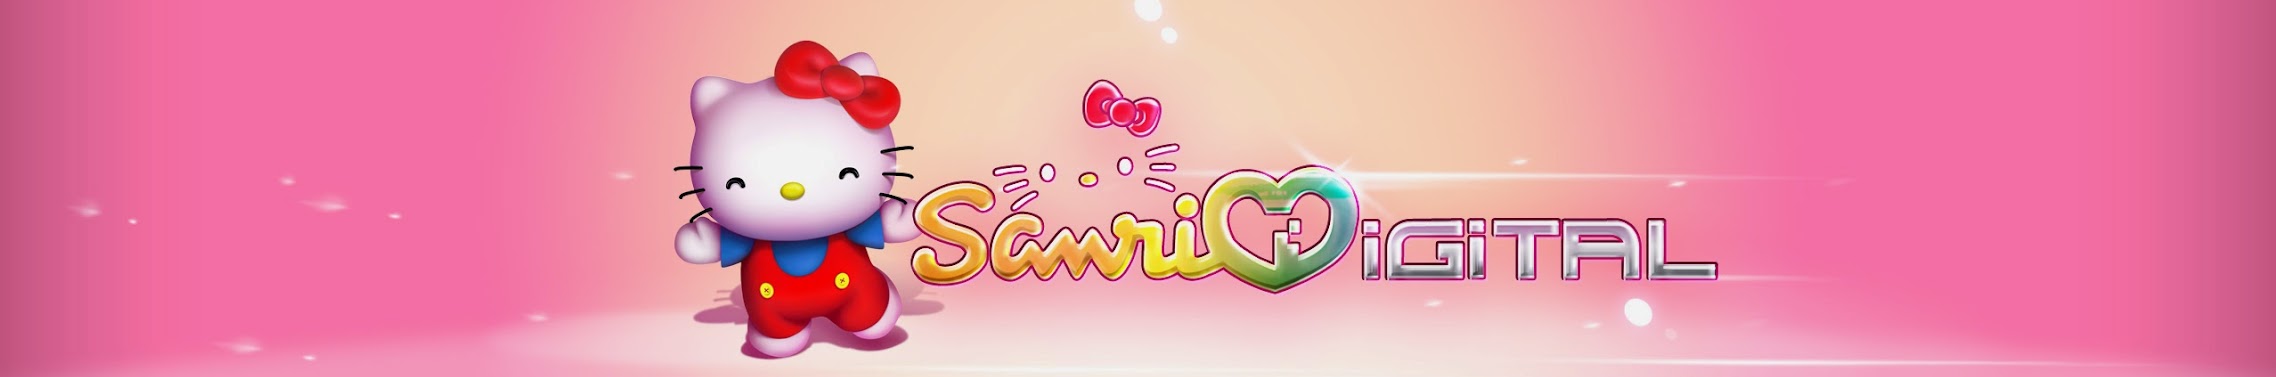 Hello Kitty Online Sanrio Digital Youtube Channel Analytics And Report Powered By Noxinfluencer Mobile